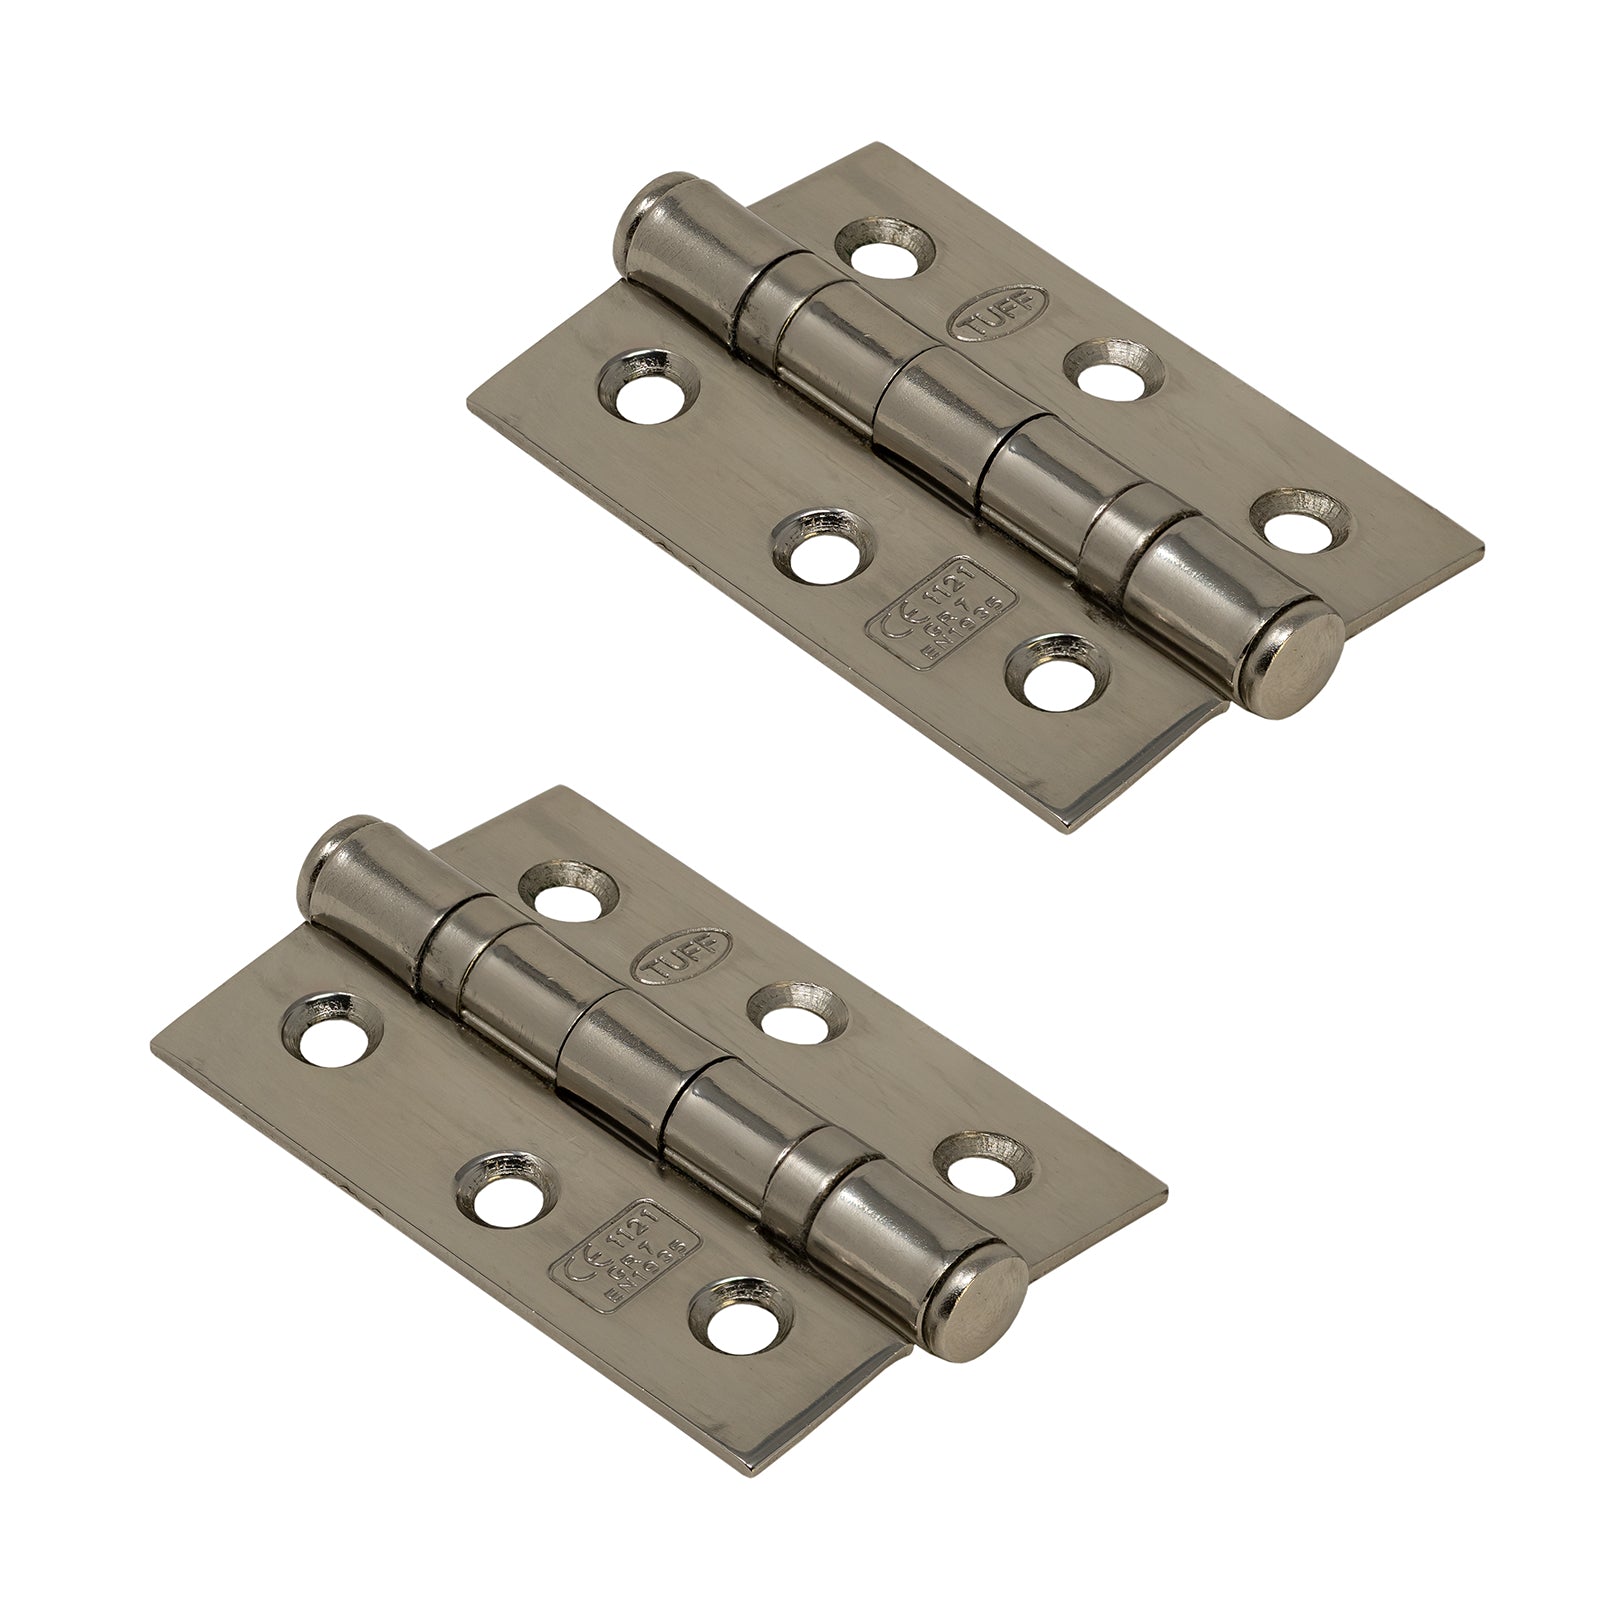 Nickel fire rated butt hinges SHOW